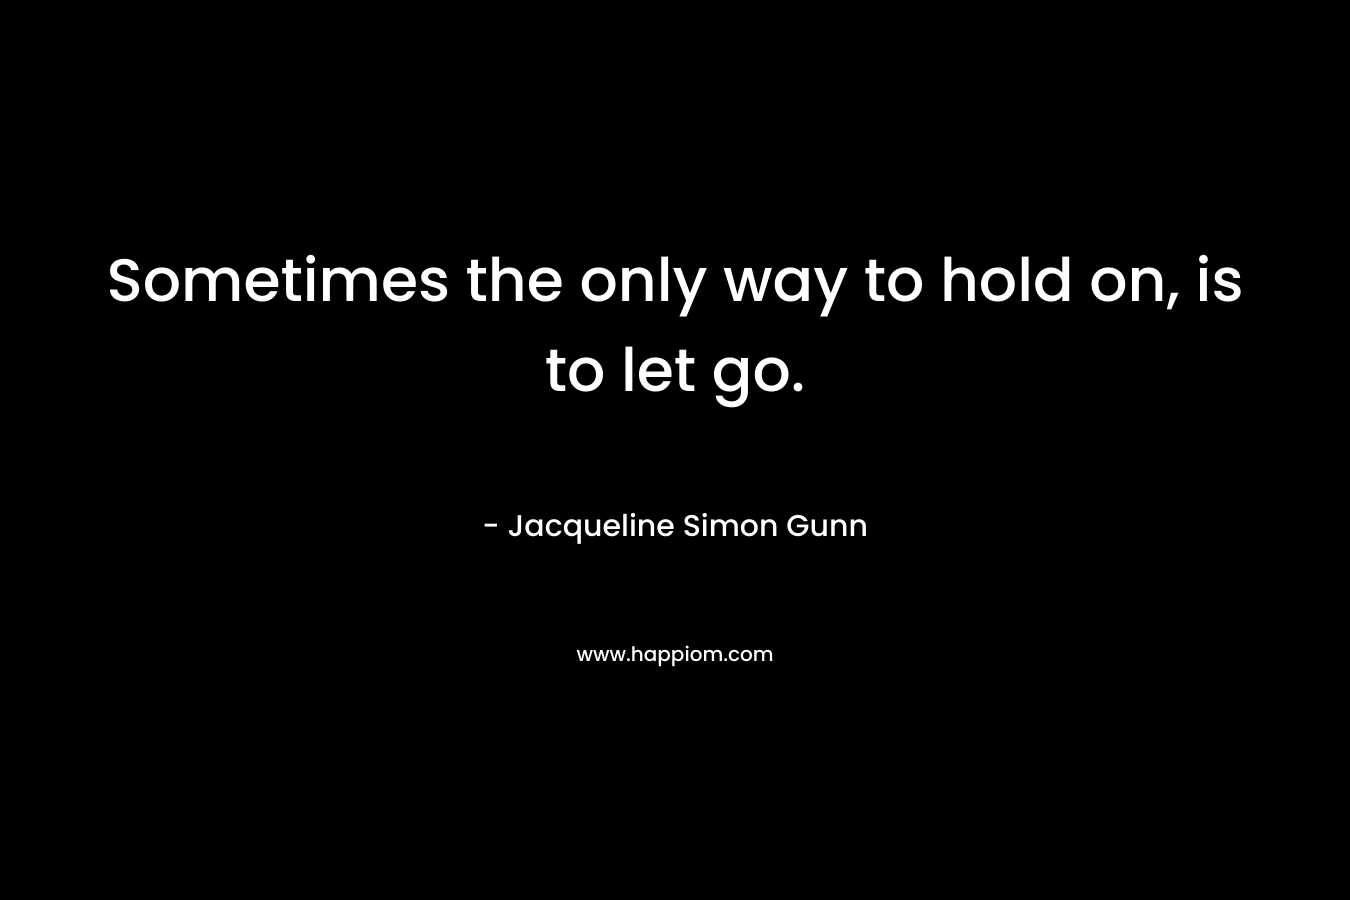 Sometimes the only way to hold on, is to let go.